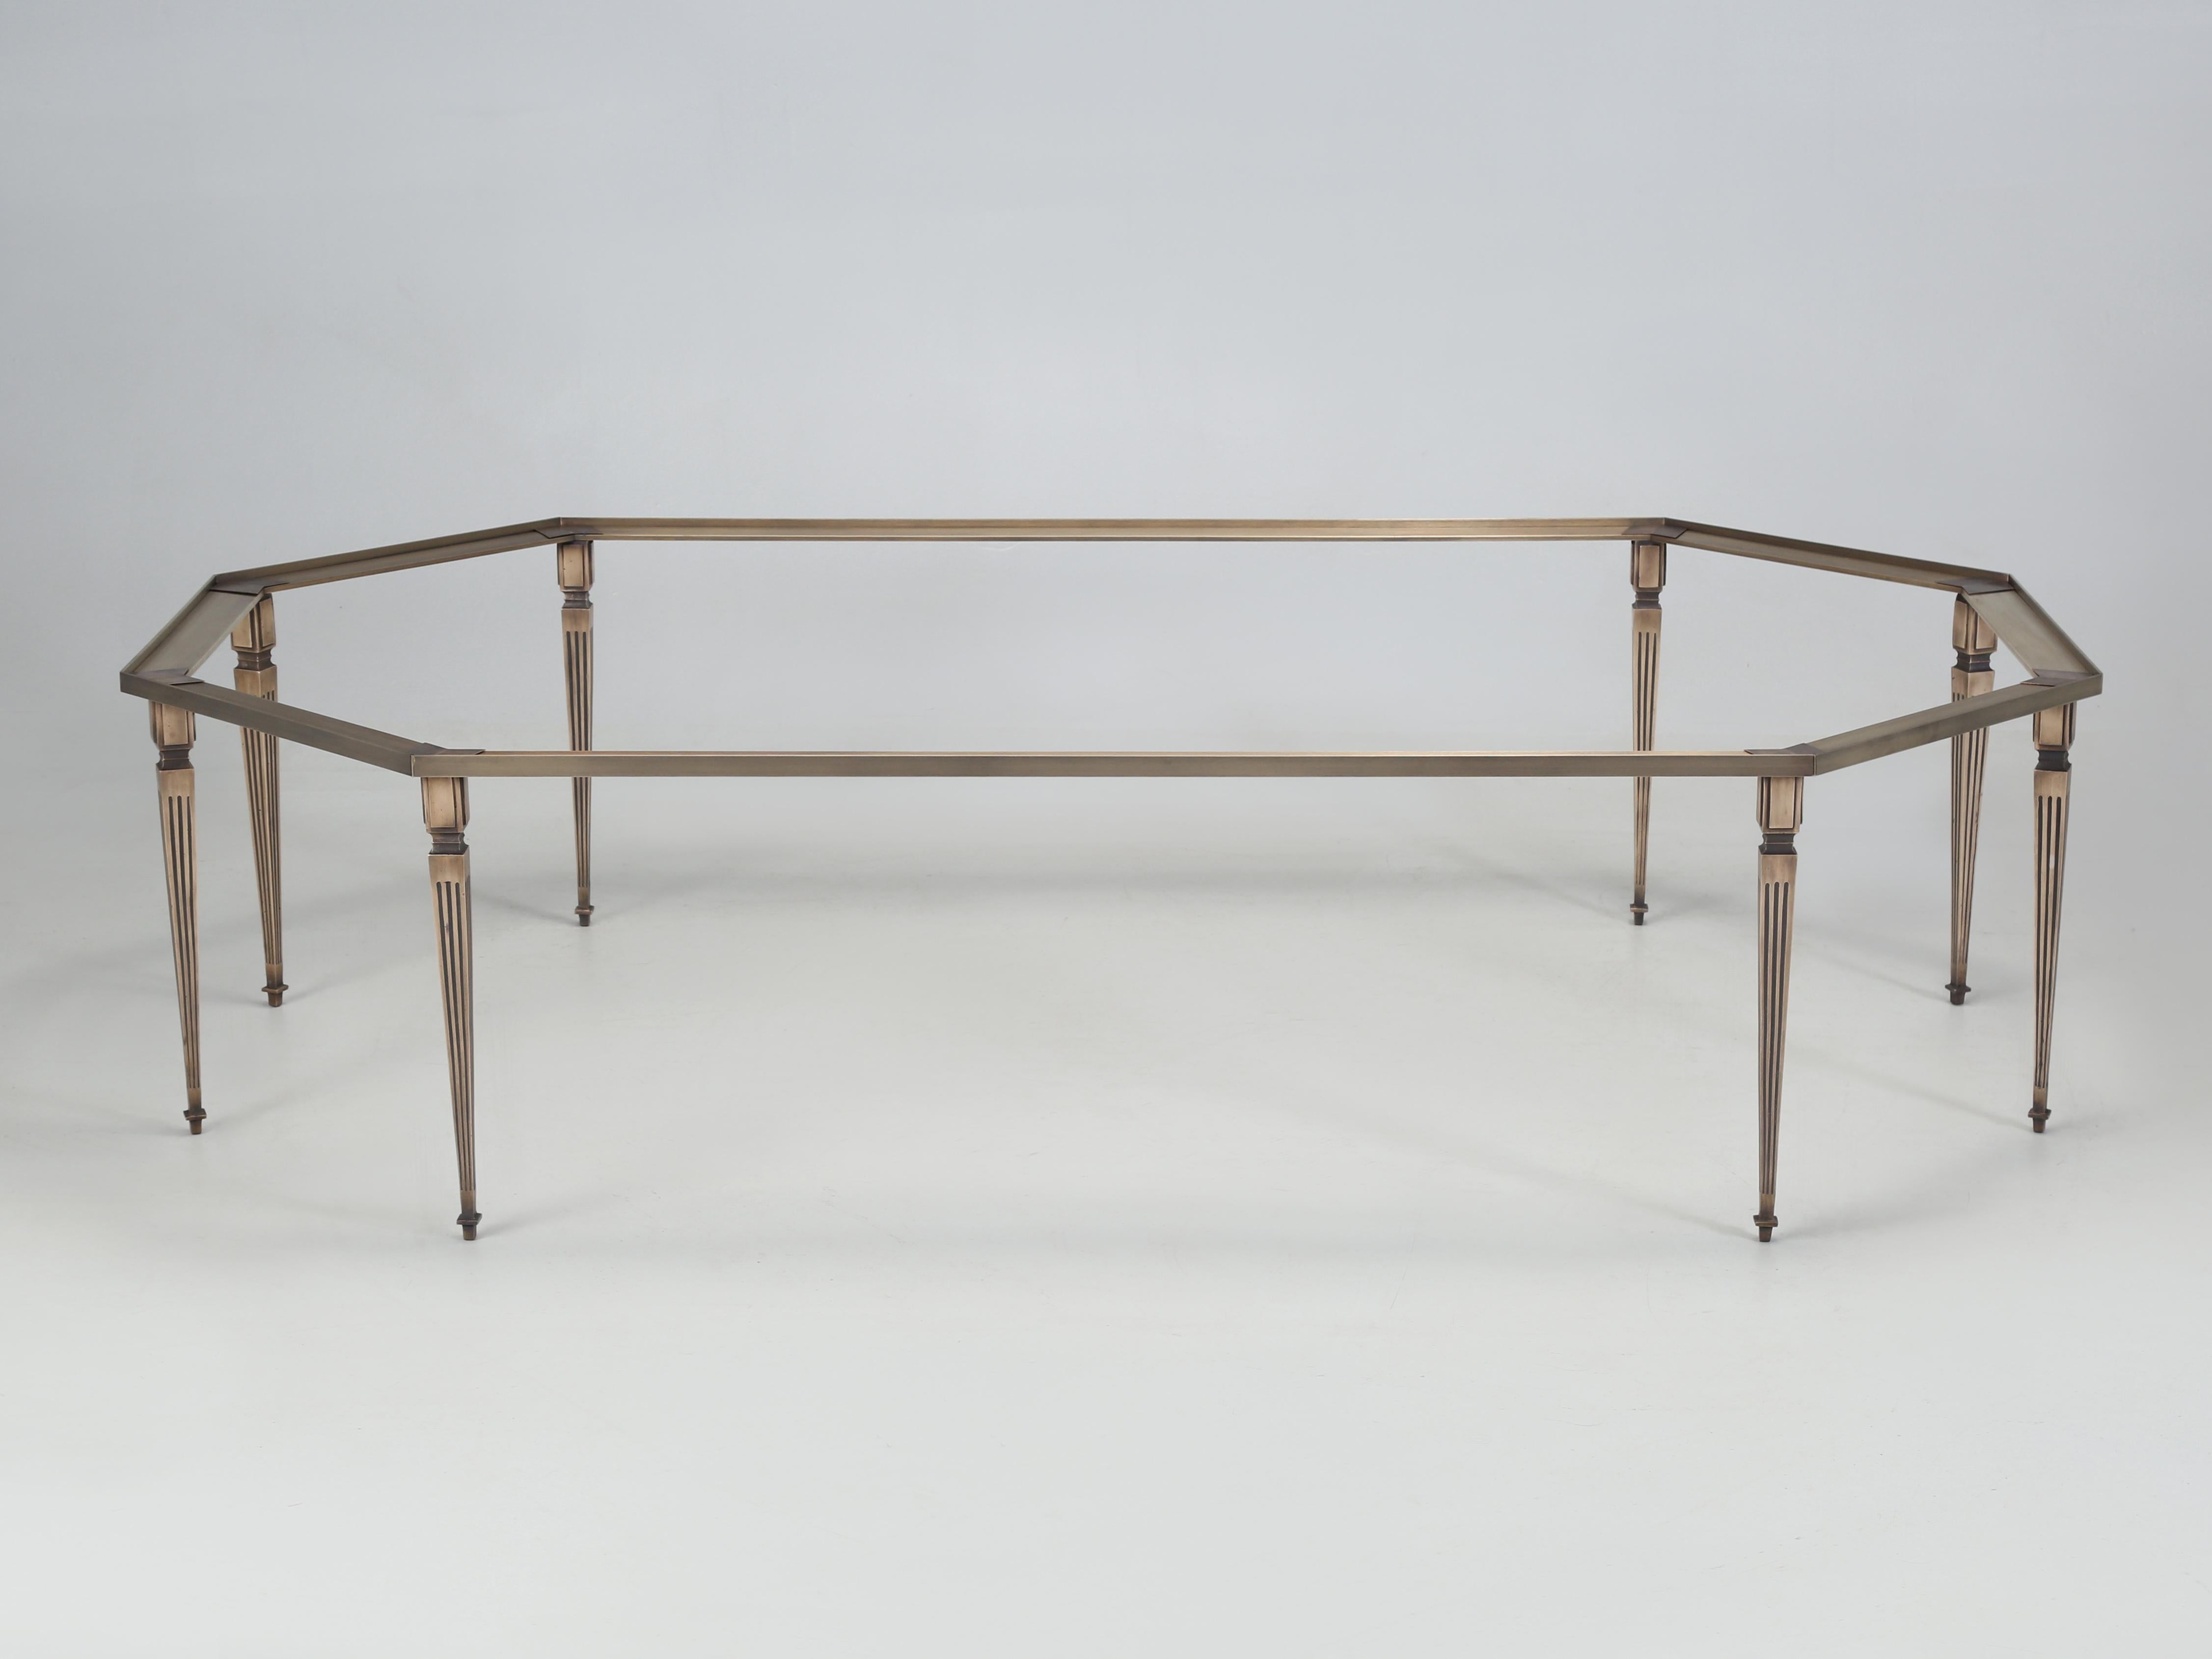 French Inspired Louis XVI Style Coffee Table made in Chicago by Old Plank. Our Bronze Louis XVI Coffee Table is available in almost any dimension and most shapes. The Louis XVI coffee table has been designed to have a glass top, simply because the